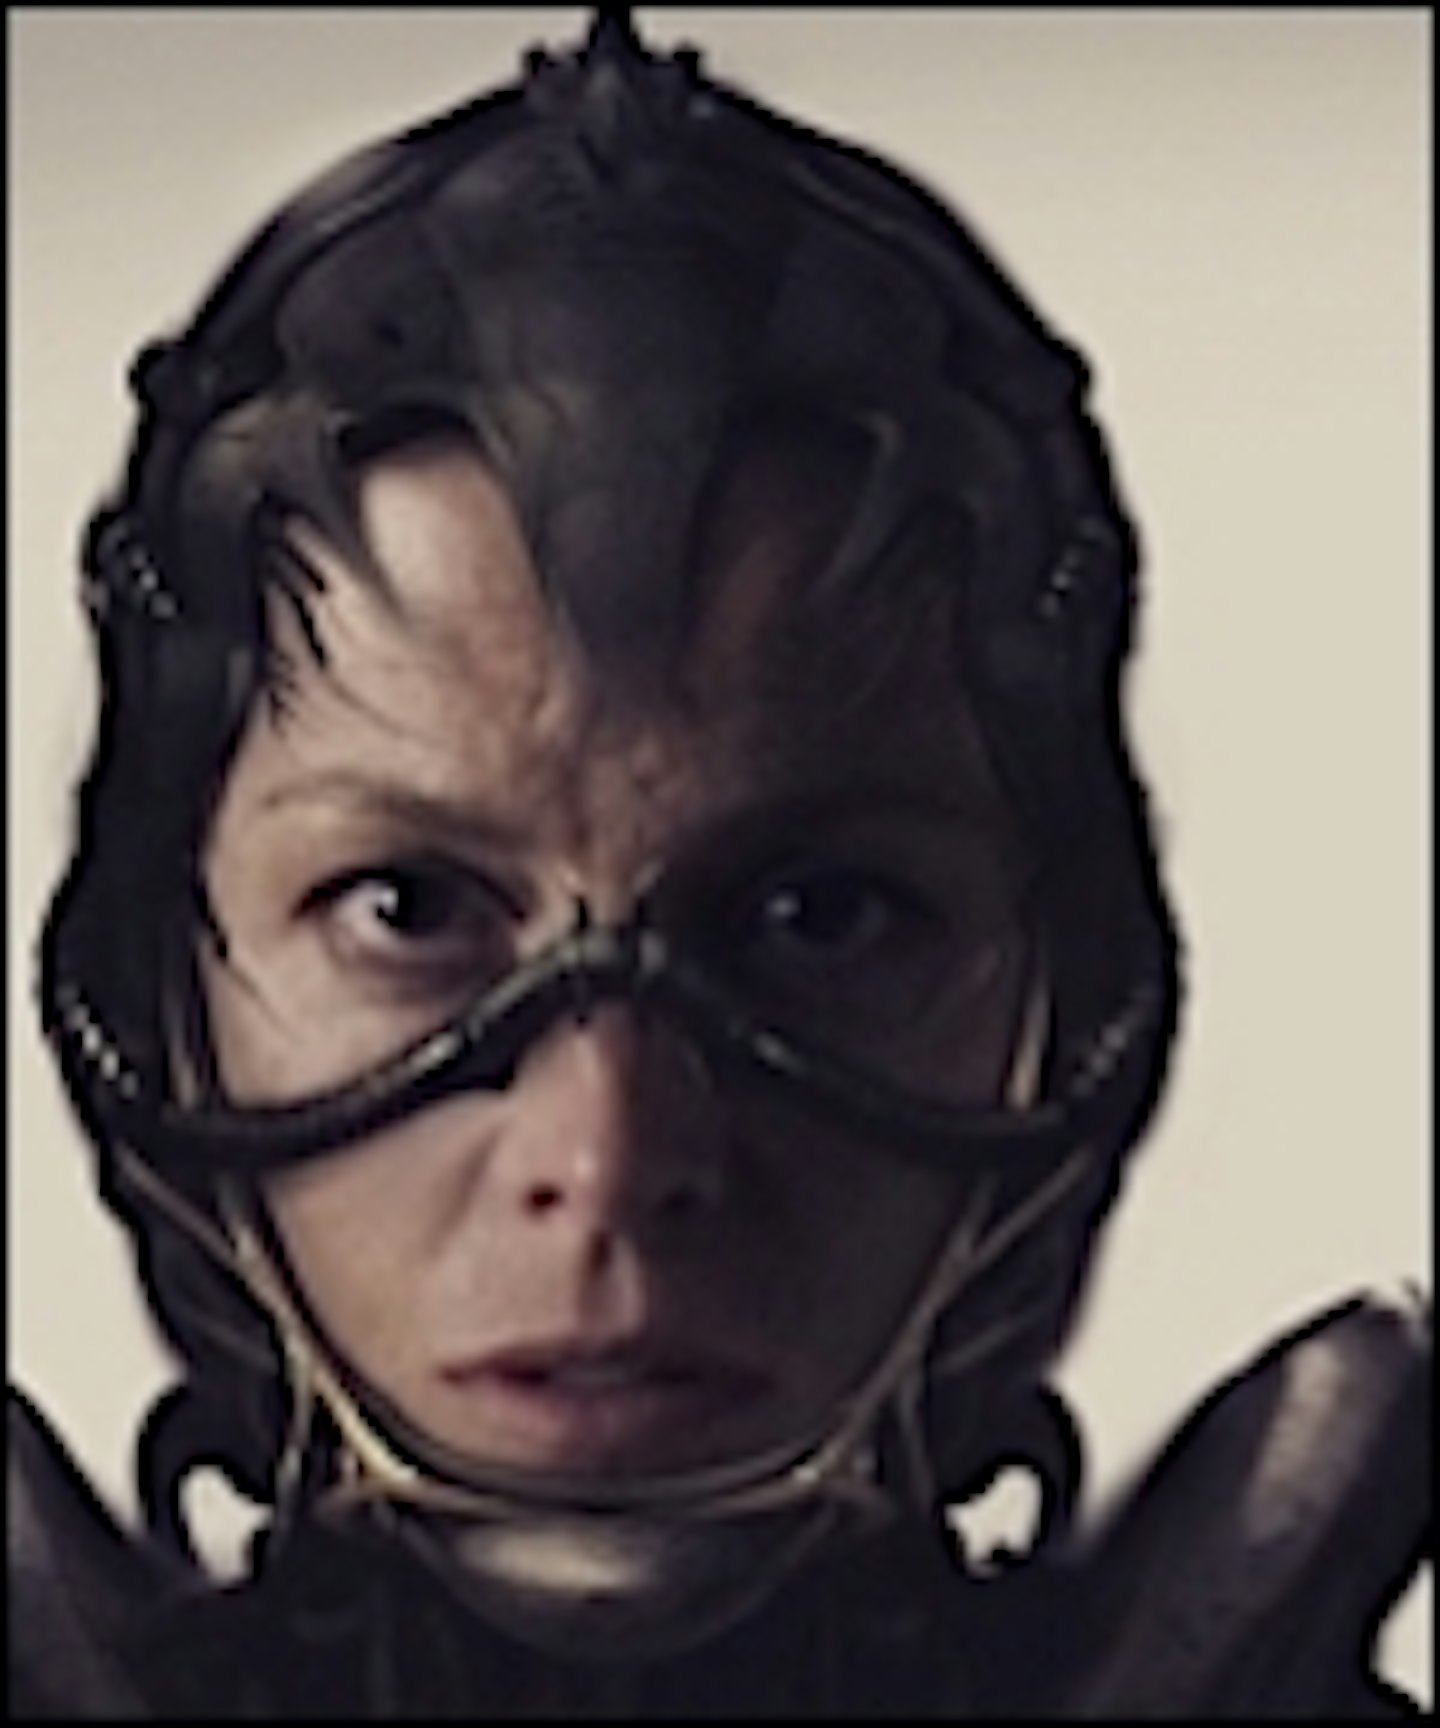 Neill Blomkamp Shares Concept Art From His Proposed Alien Sequel